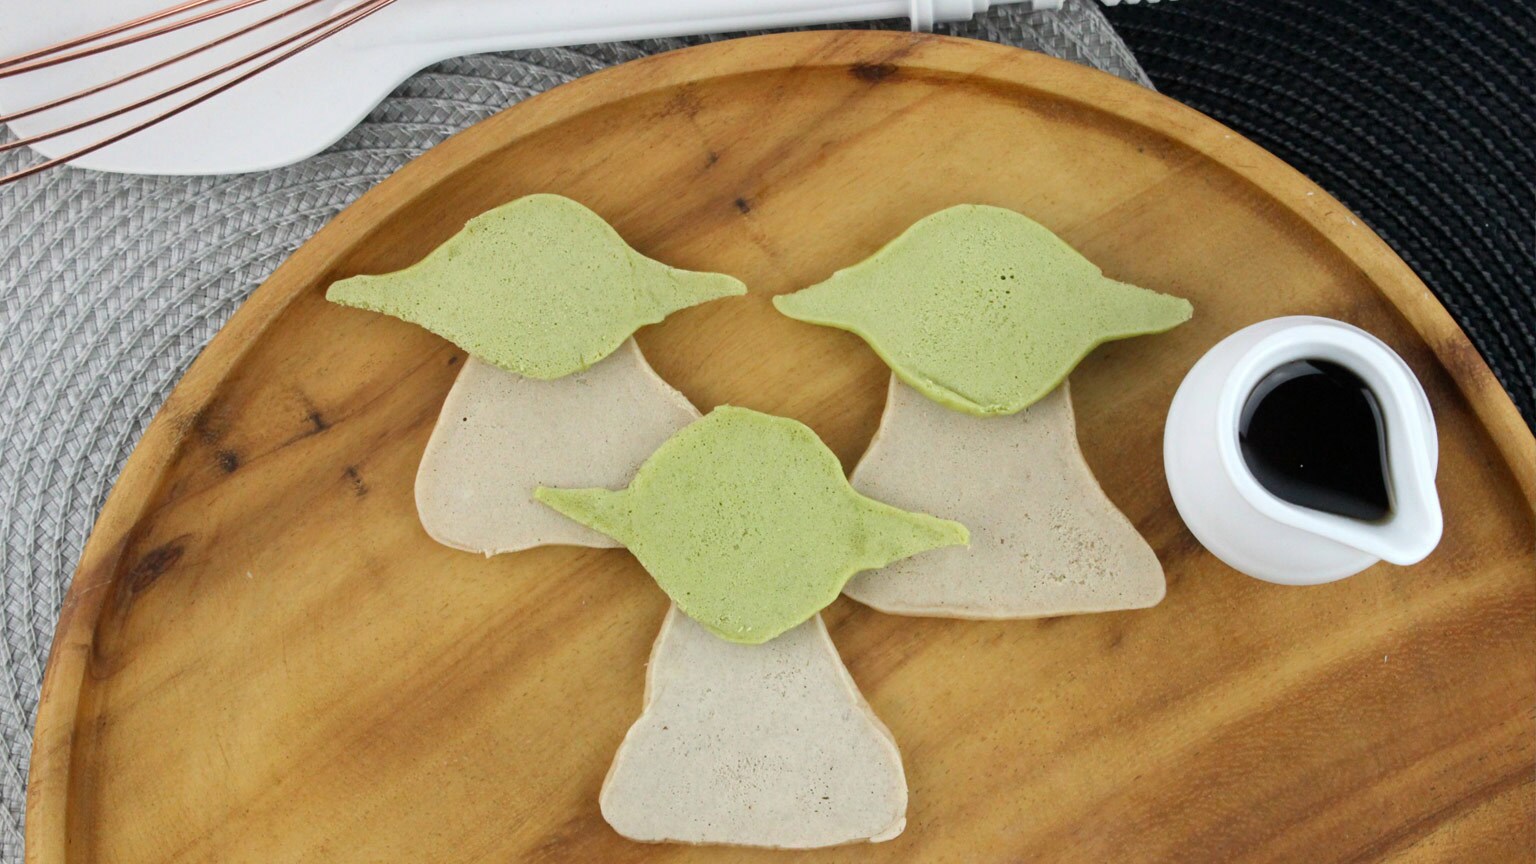 With This Recipe for Yoda Pancakes, Delicious Your Brunch Will Be